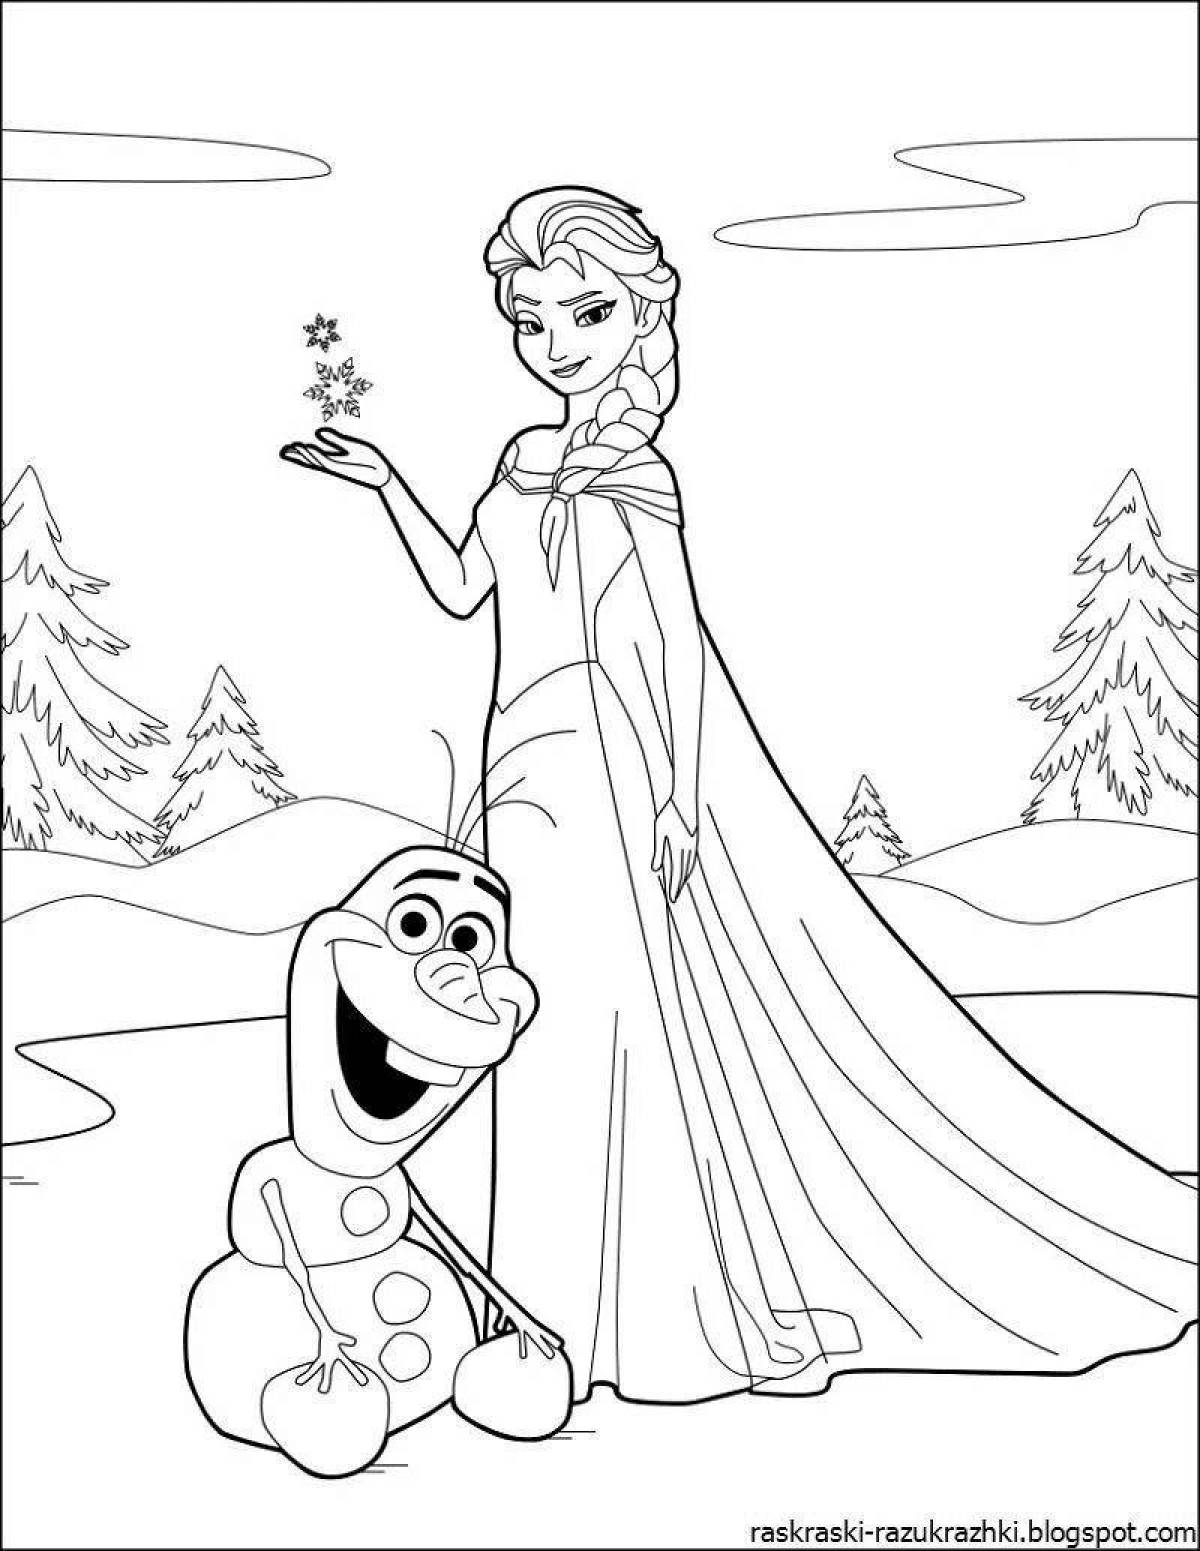 Frozen holiday coloring book for 5-6 year olds